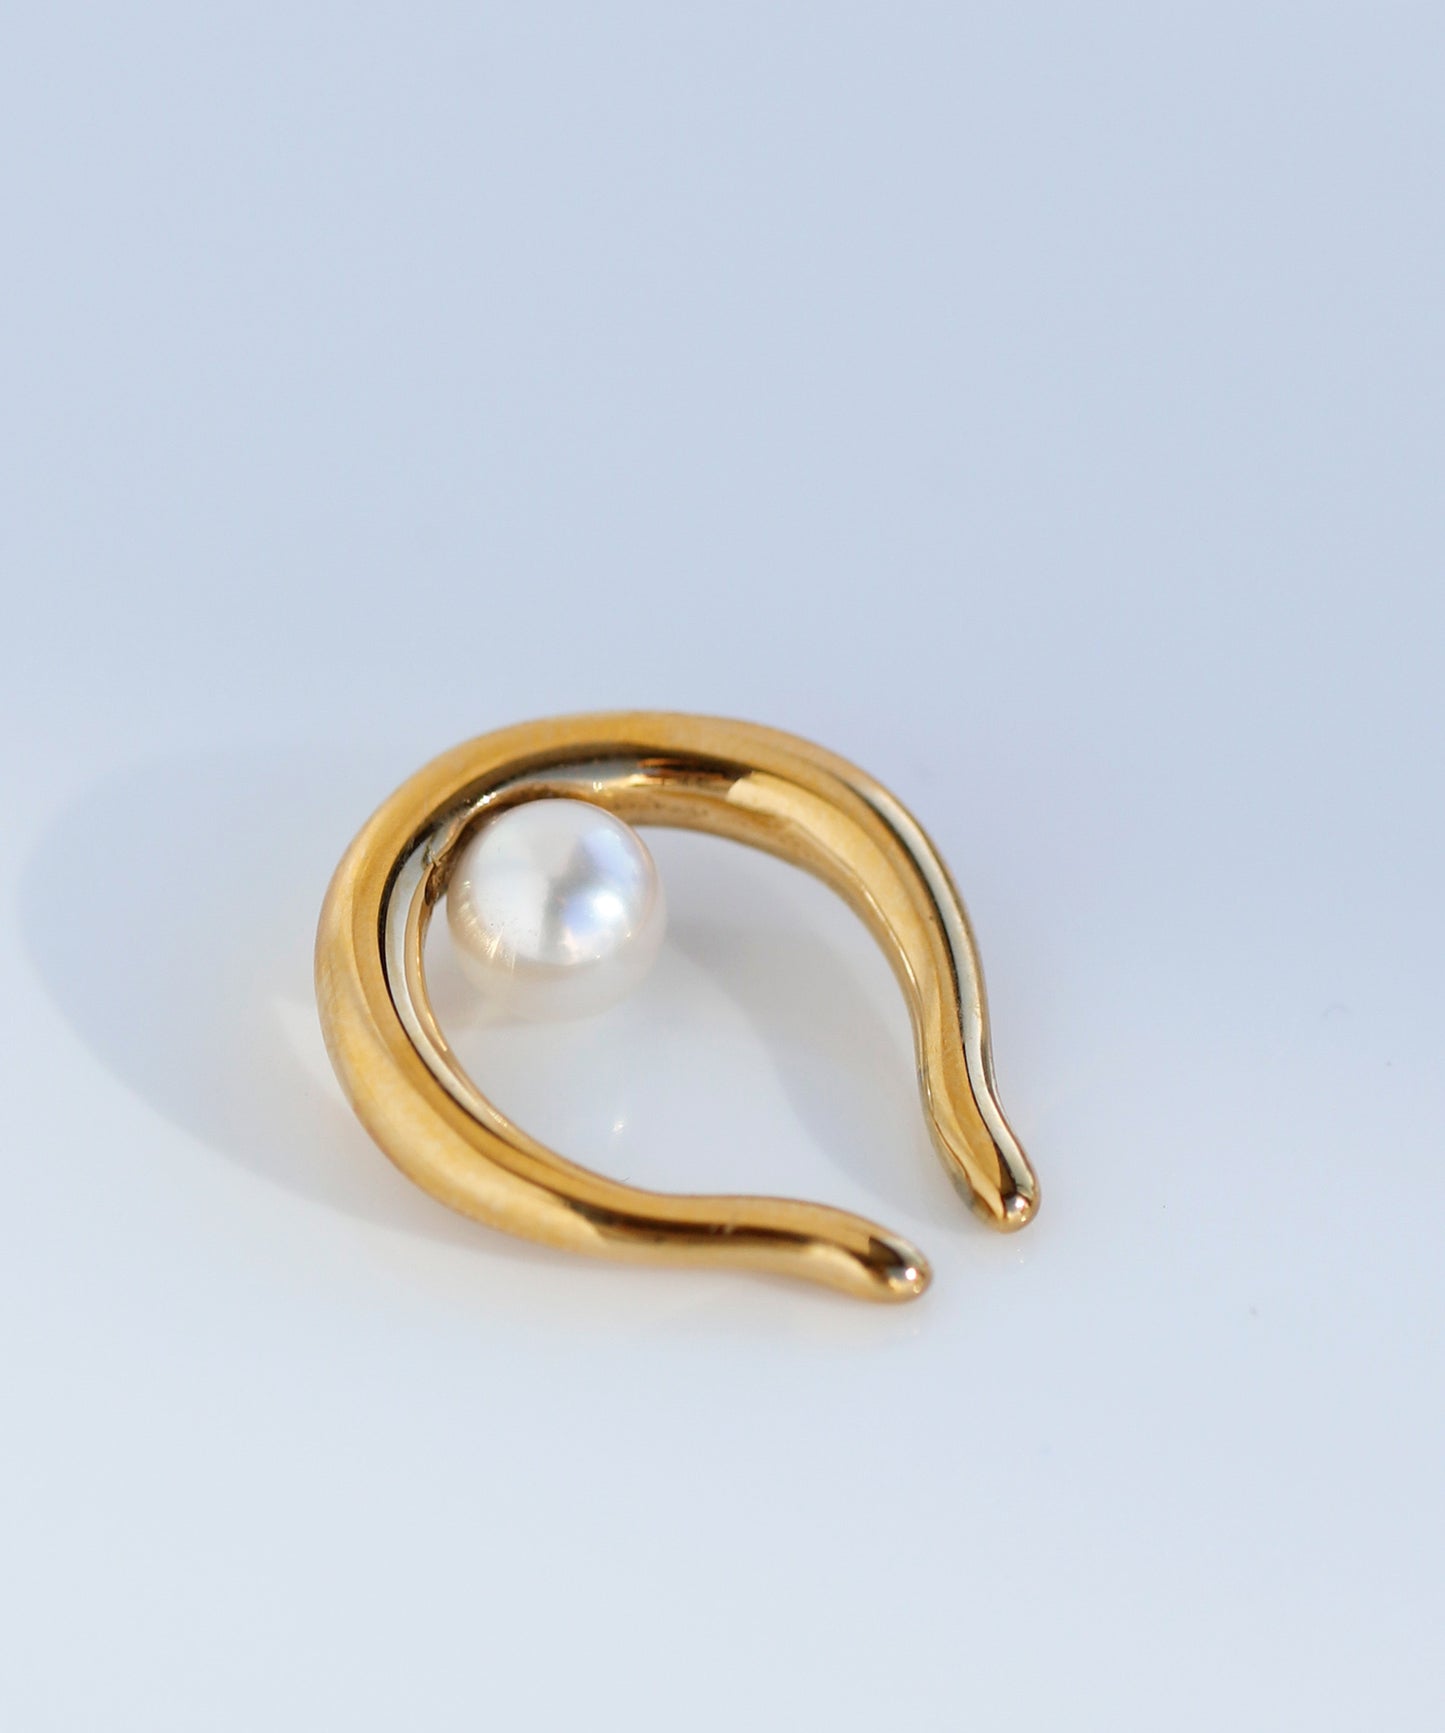 【Stainless Seel IP】 Pearl Ear Cuff